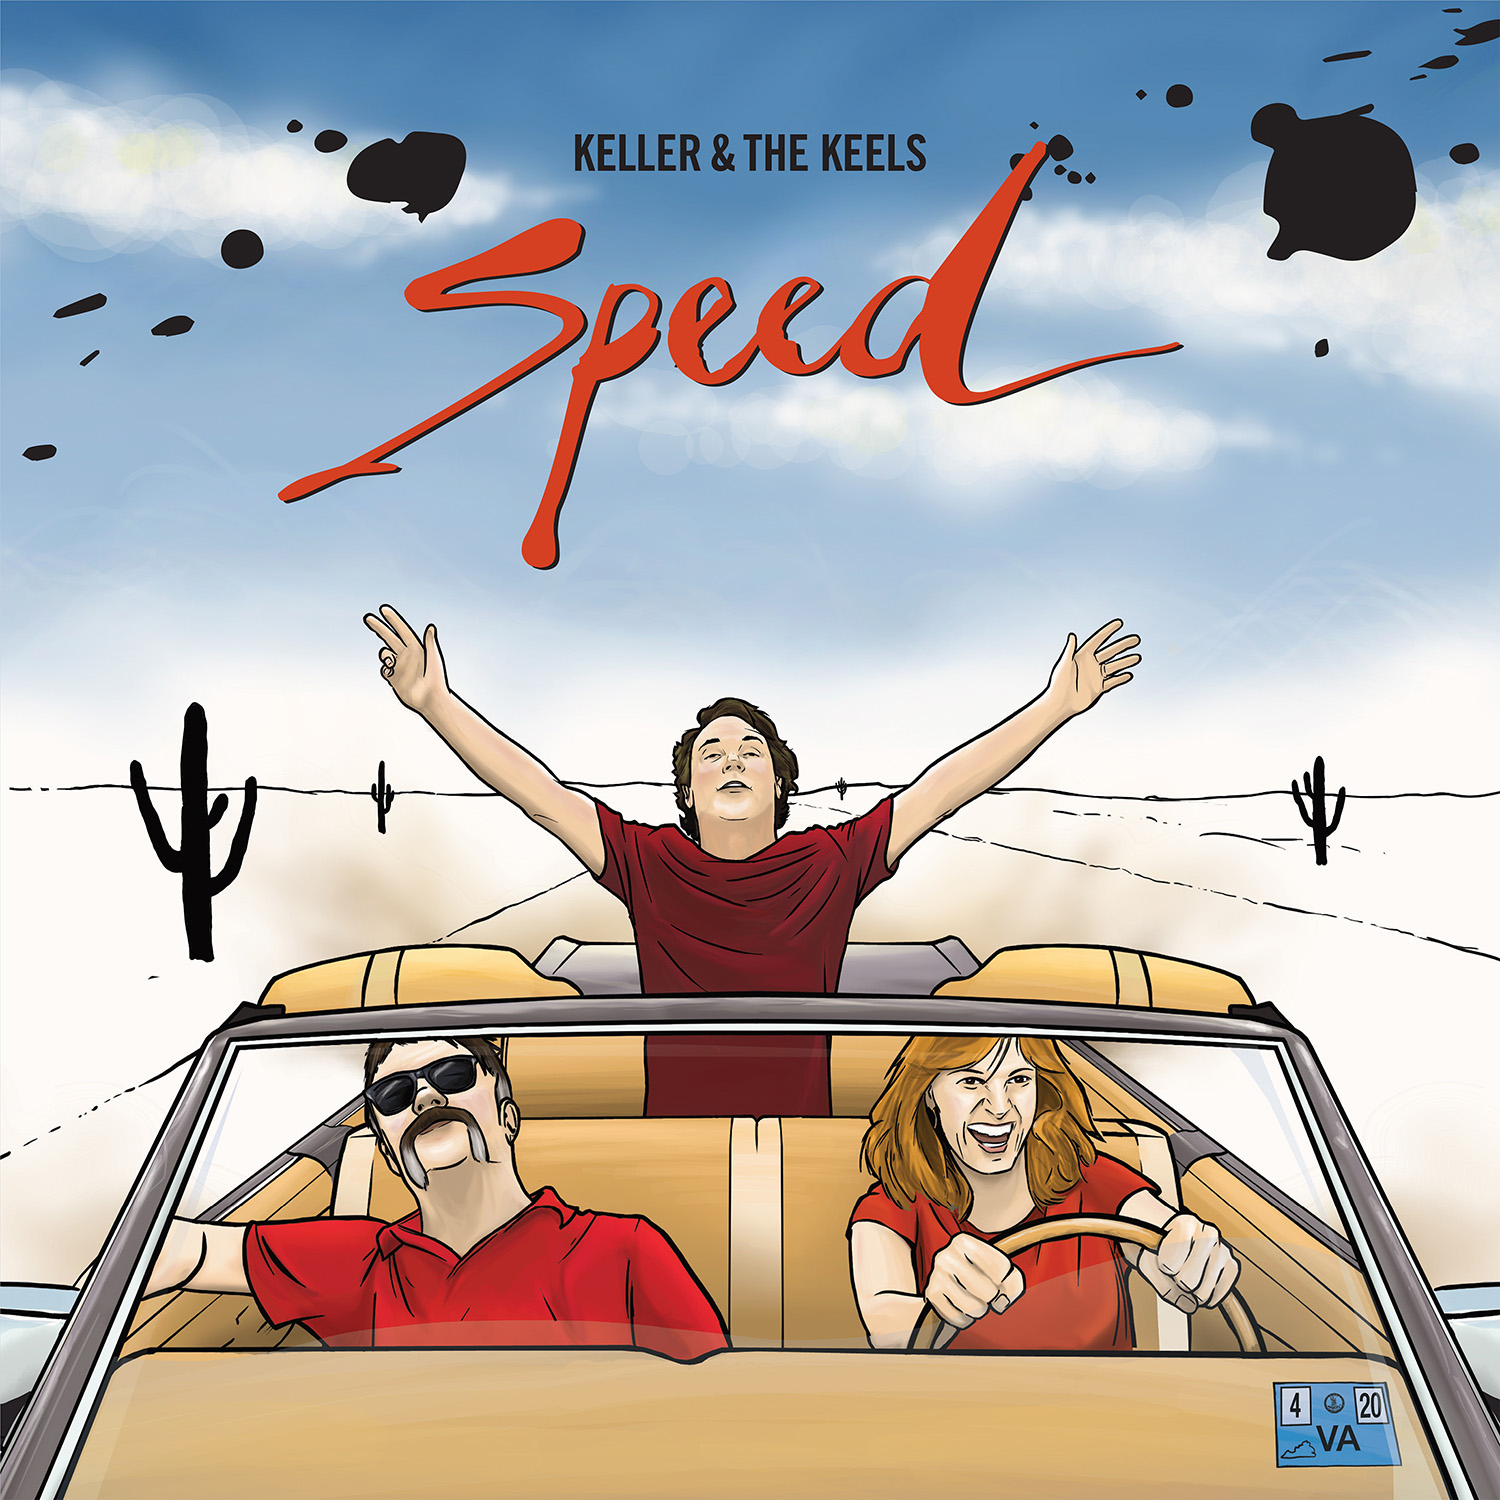 Interview and Album Review: Keller Williams Talks About His New Album SPEED (out 11/22), Looks Back on 25 Studio Albums and Discusses his 2020 Plans